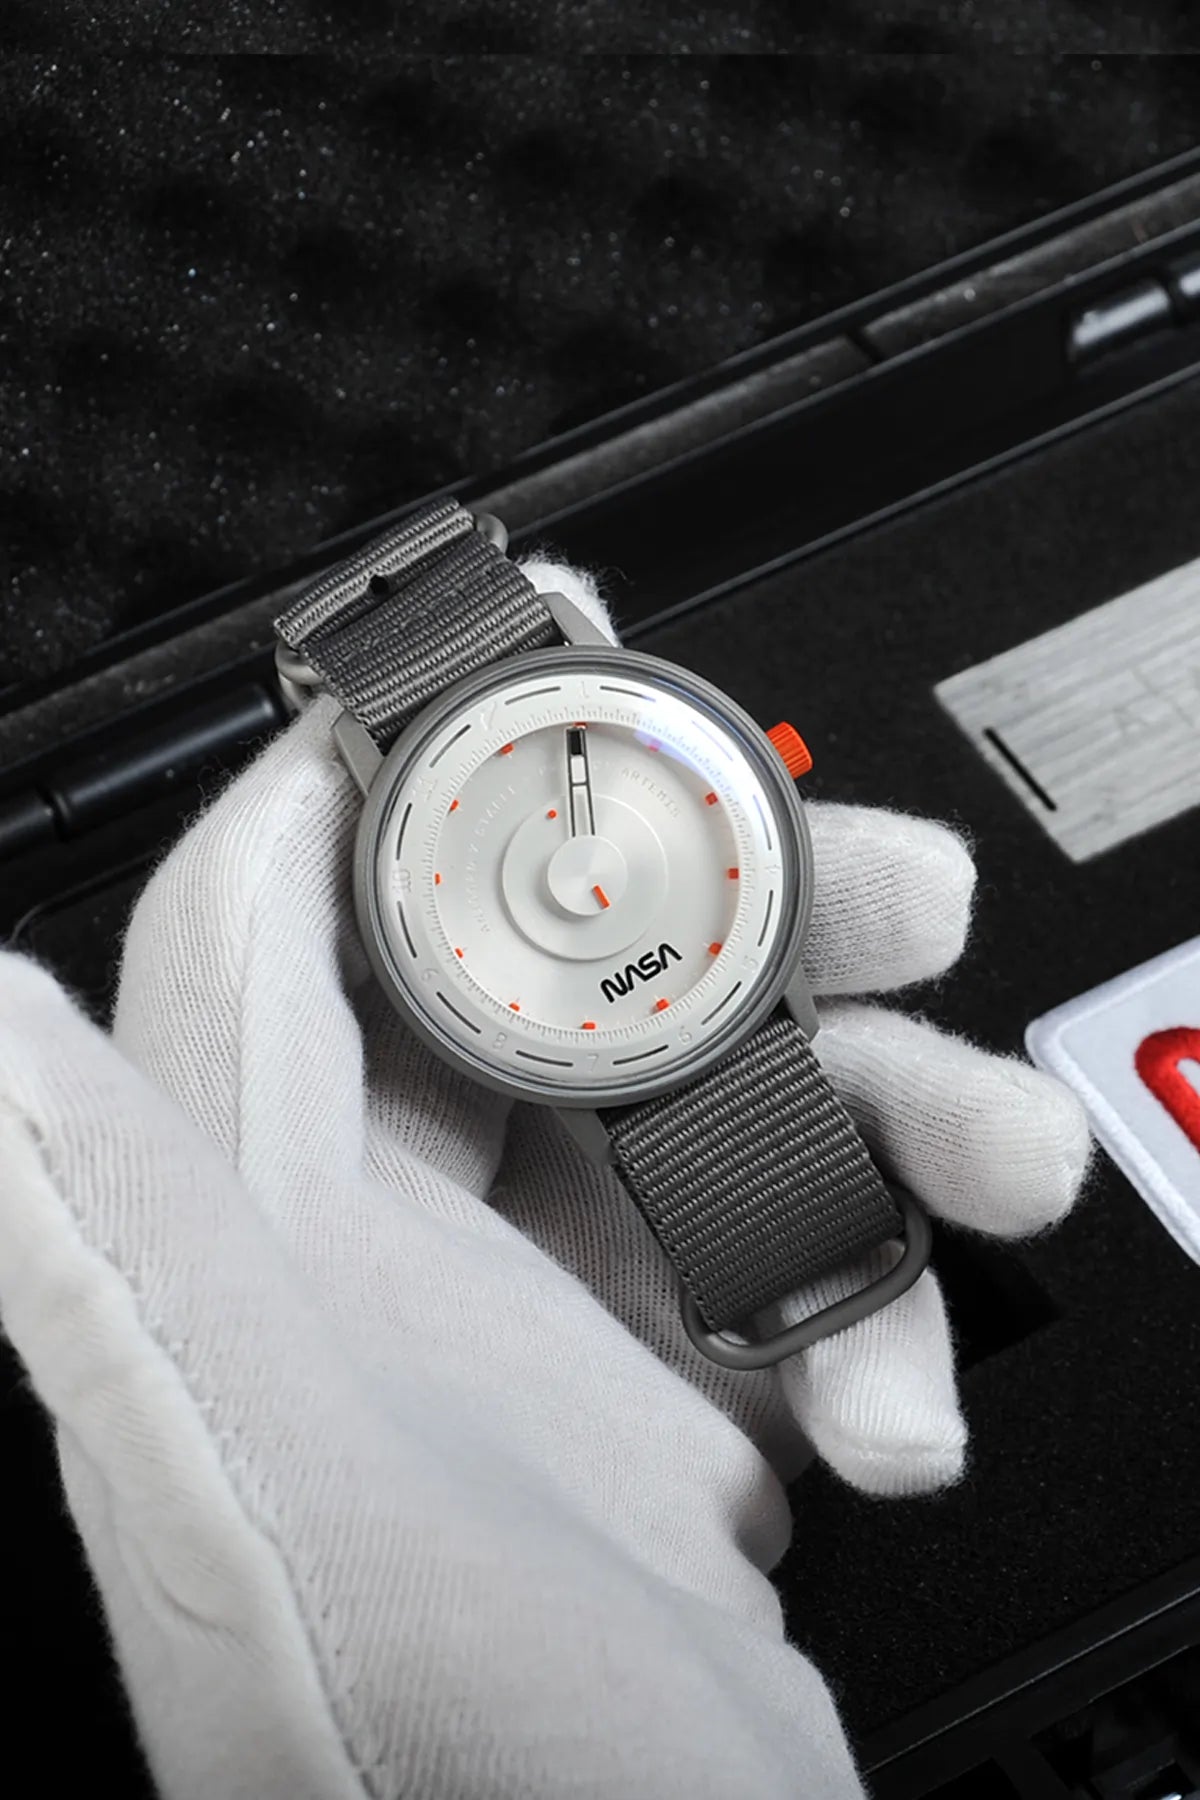 Artemis Time has a clean, minimal and sleek design, the gray color is inspired by the moon rock, with the orange highlights on the dial and crown recalling the “International Orange” applied on the spacesuit. 